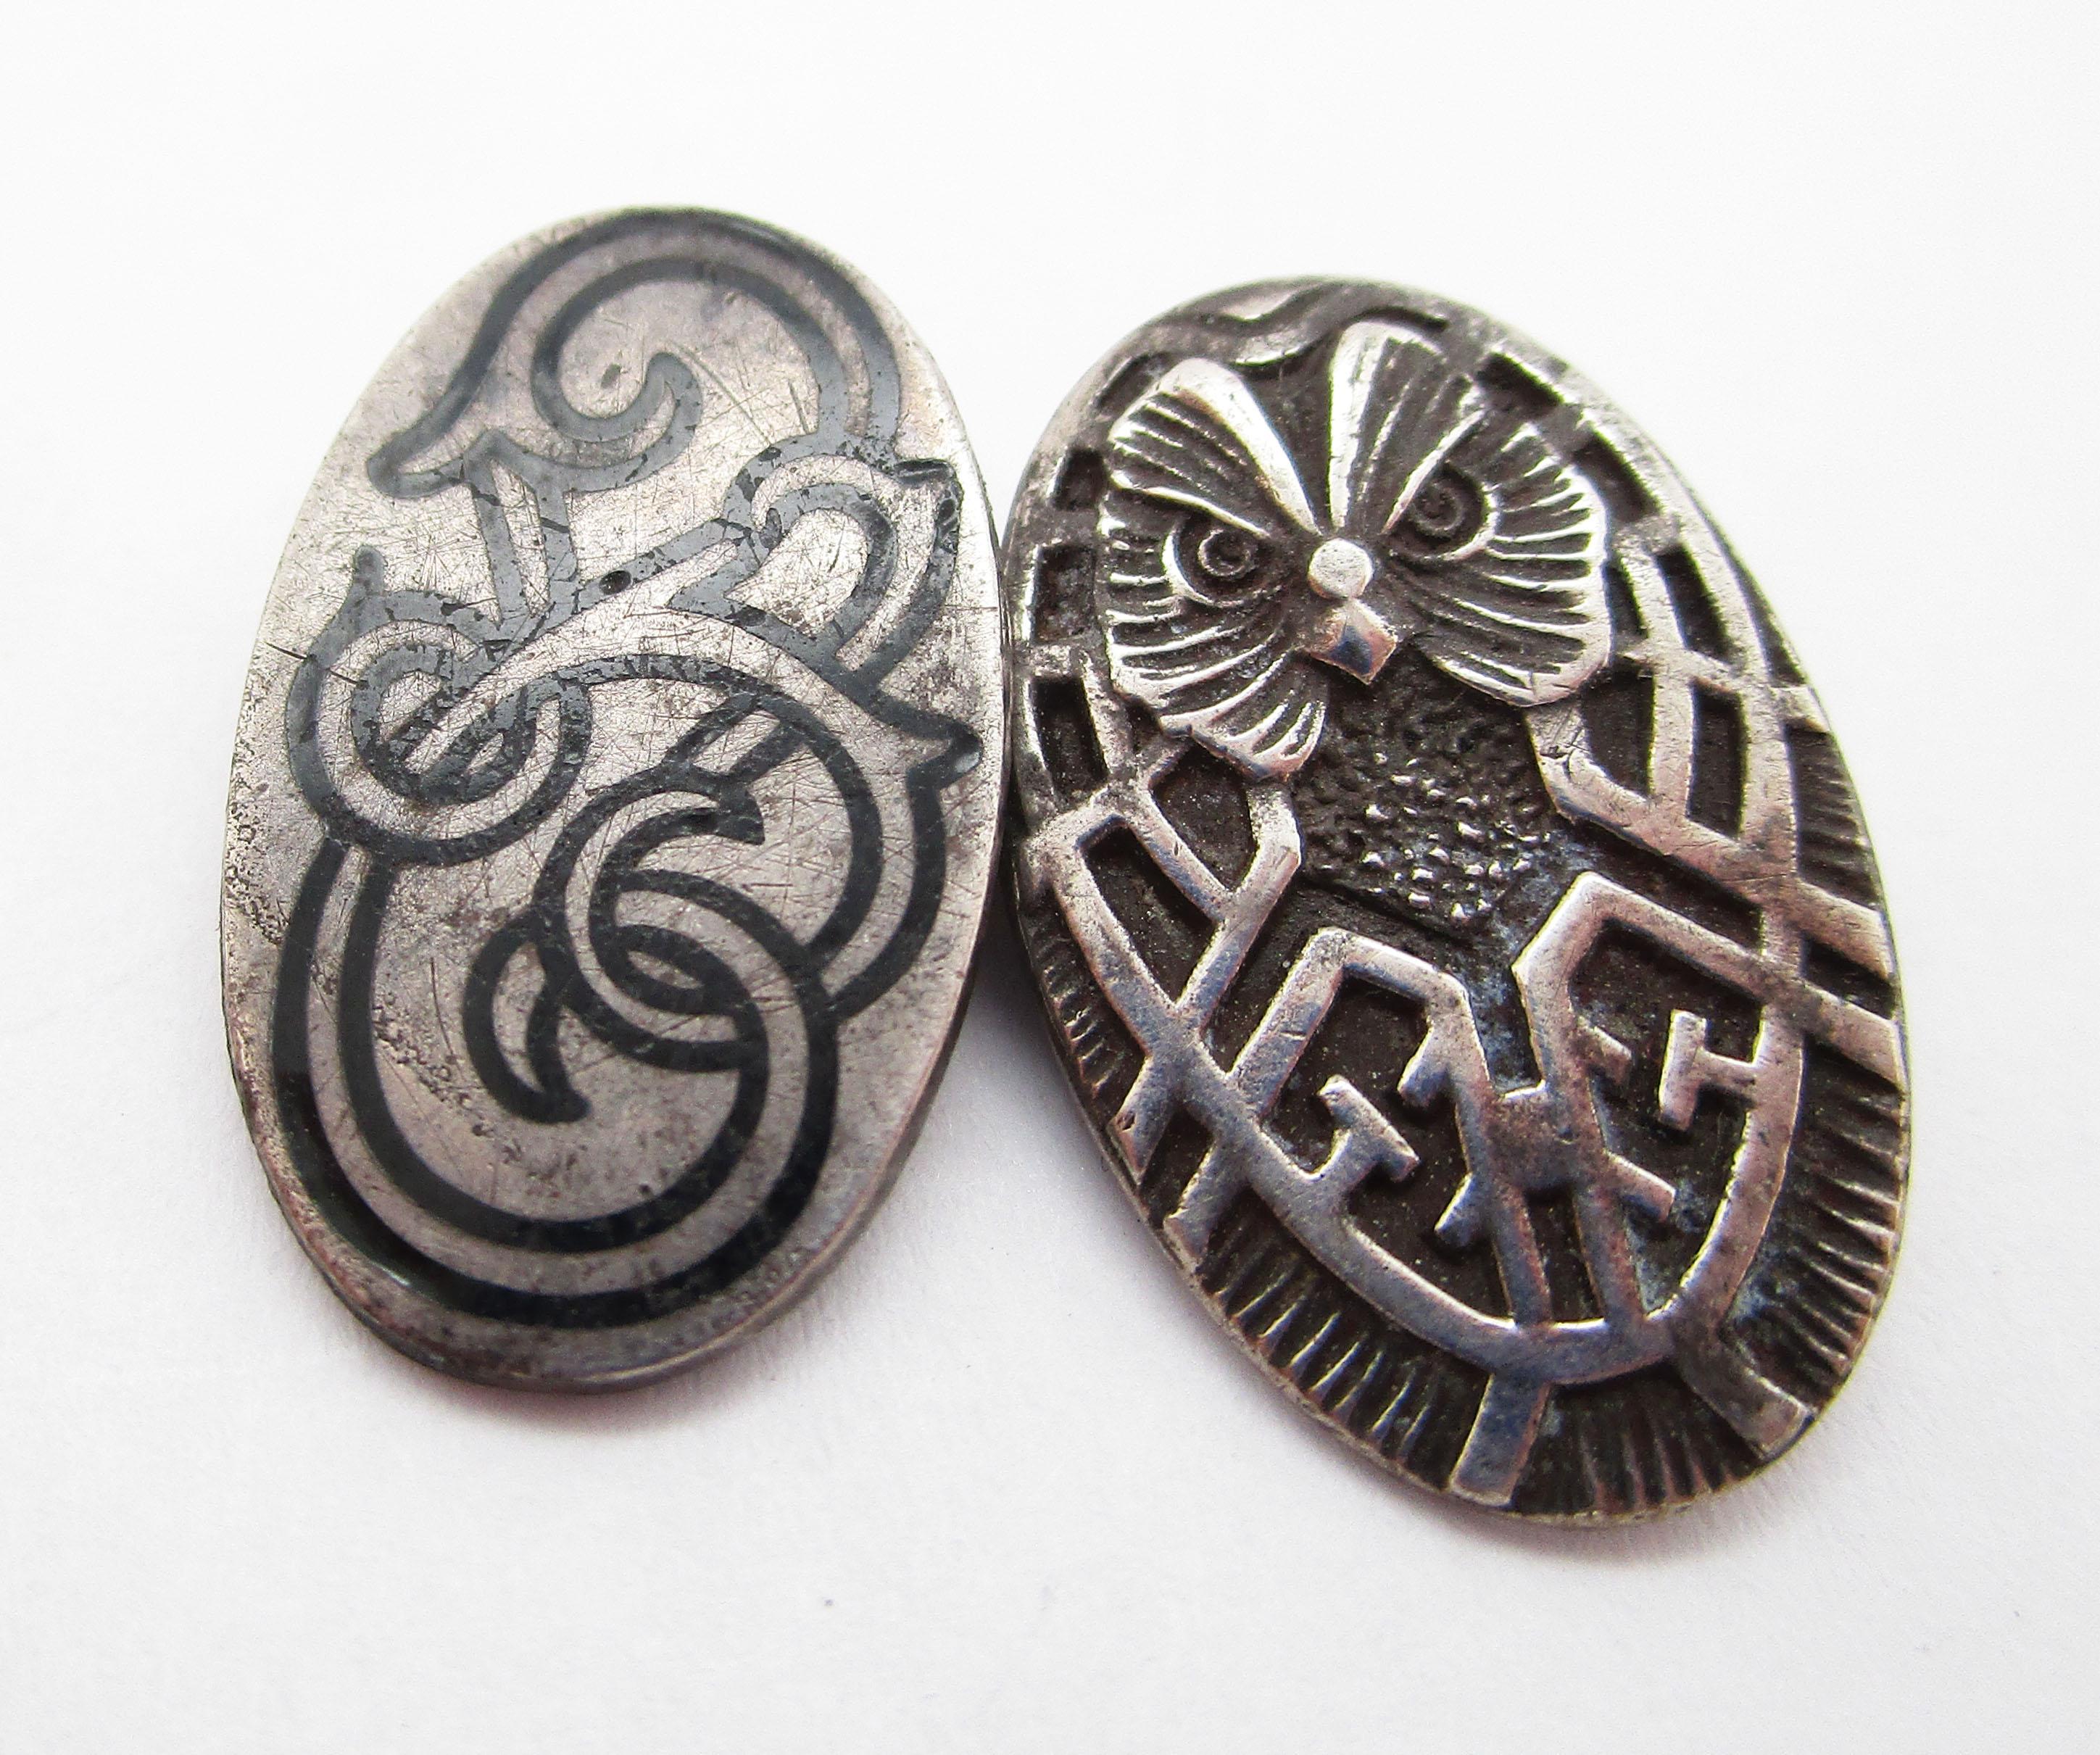 These incredible Art Nouveau cufflinks by the Unger Brothers are from 1890 and are in sterling silver. They feature a magnificent aesthetic movement design with a majestic wise owl peering out from one side and a dramatic enameled Celtic knot on the